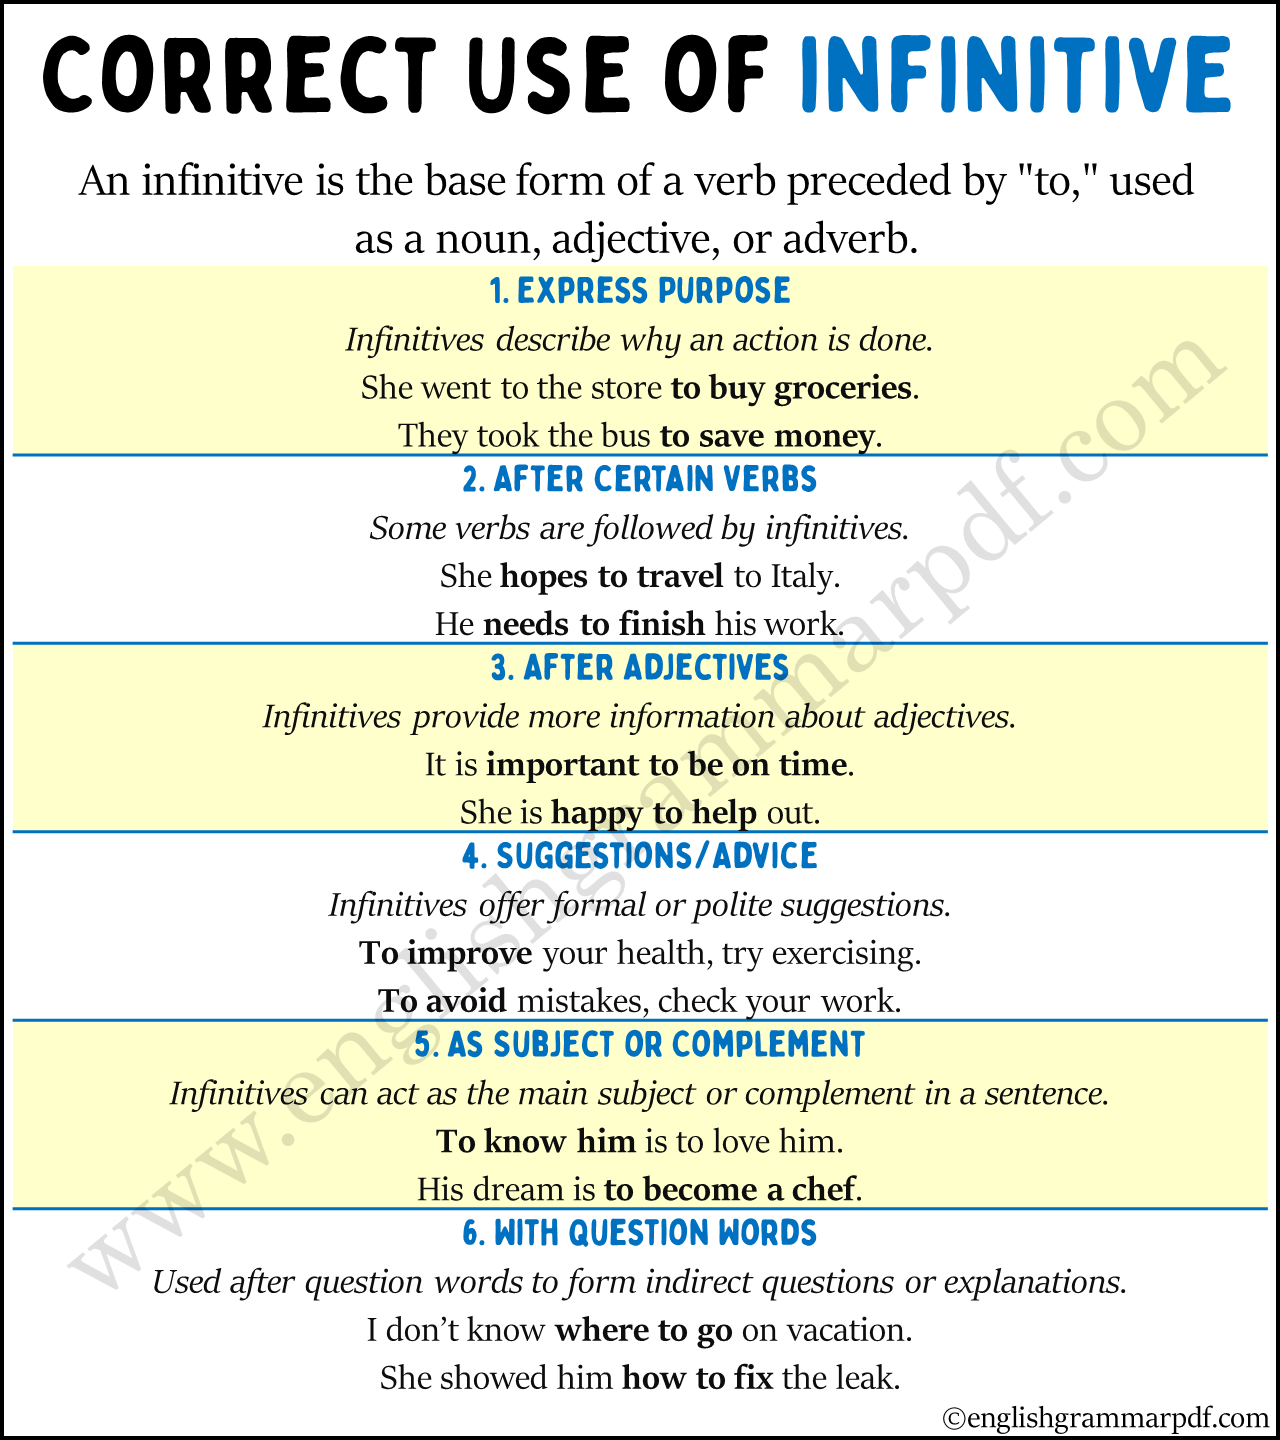 Correct Use of infinitive